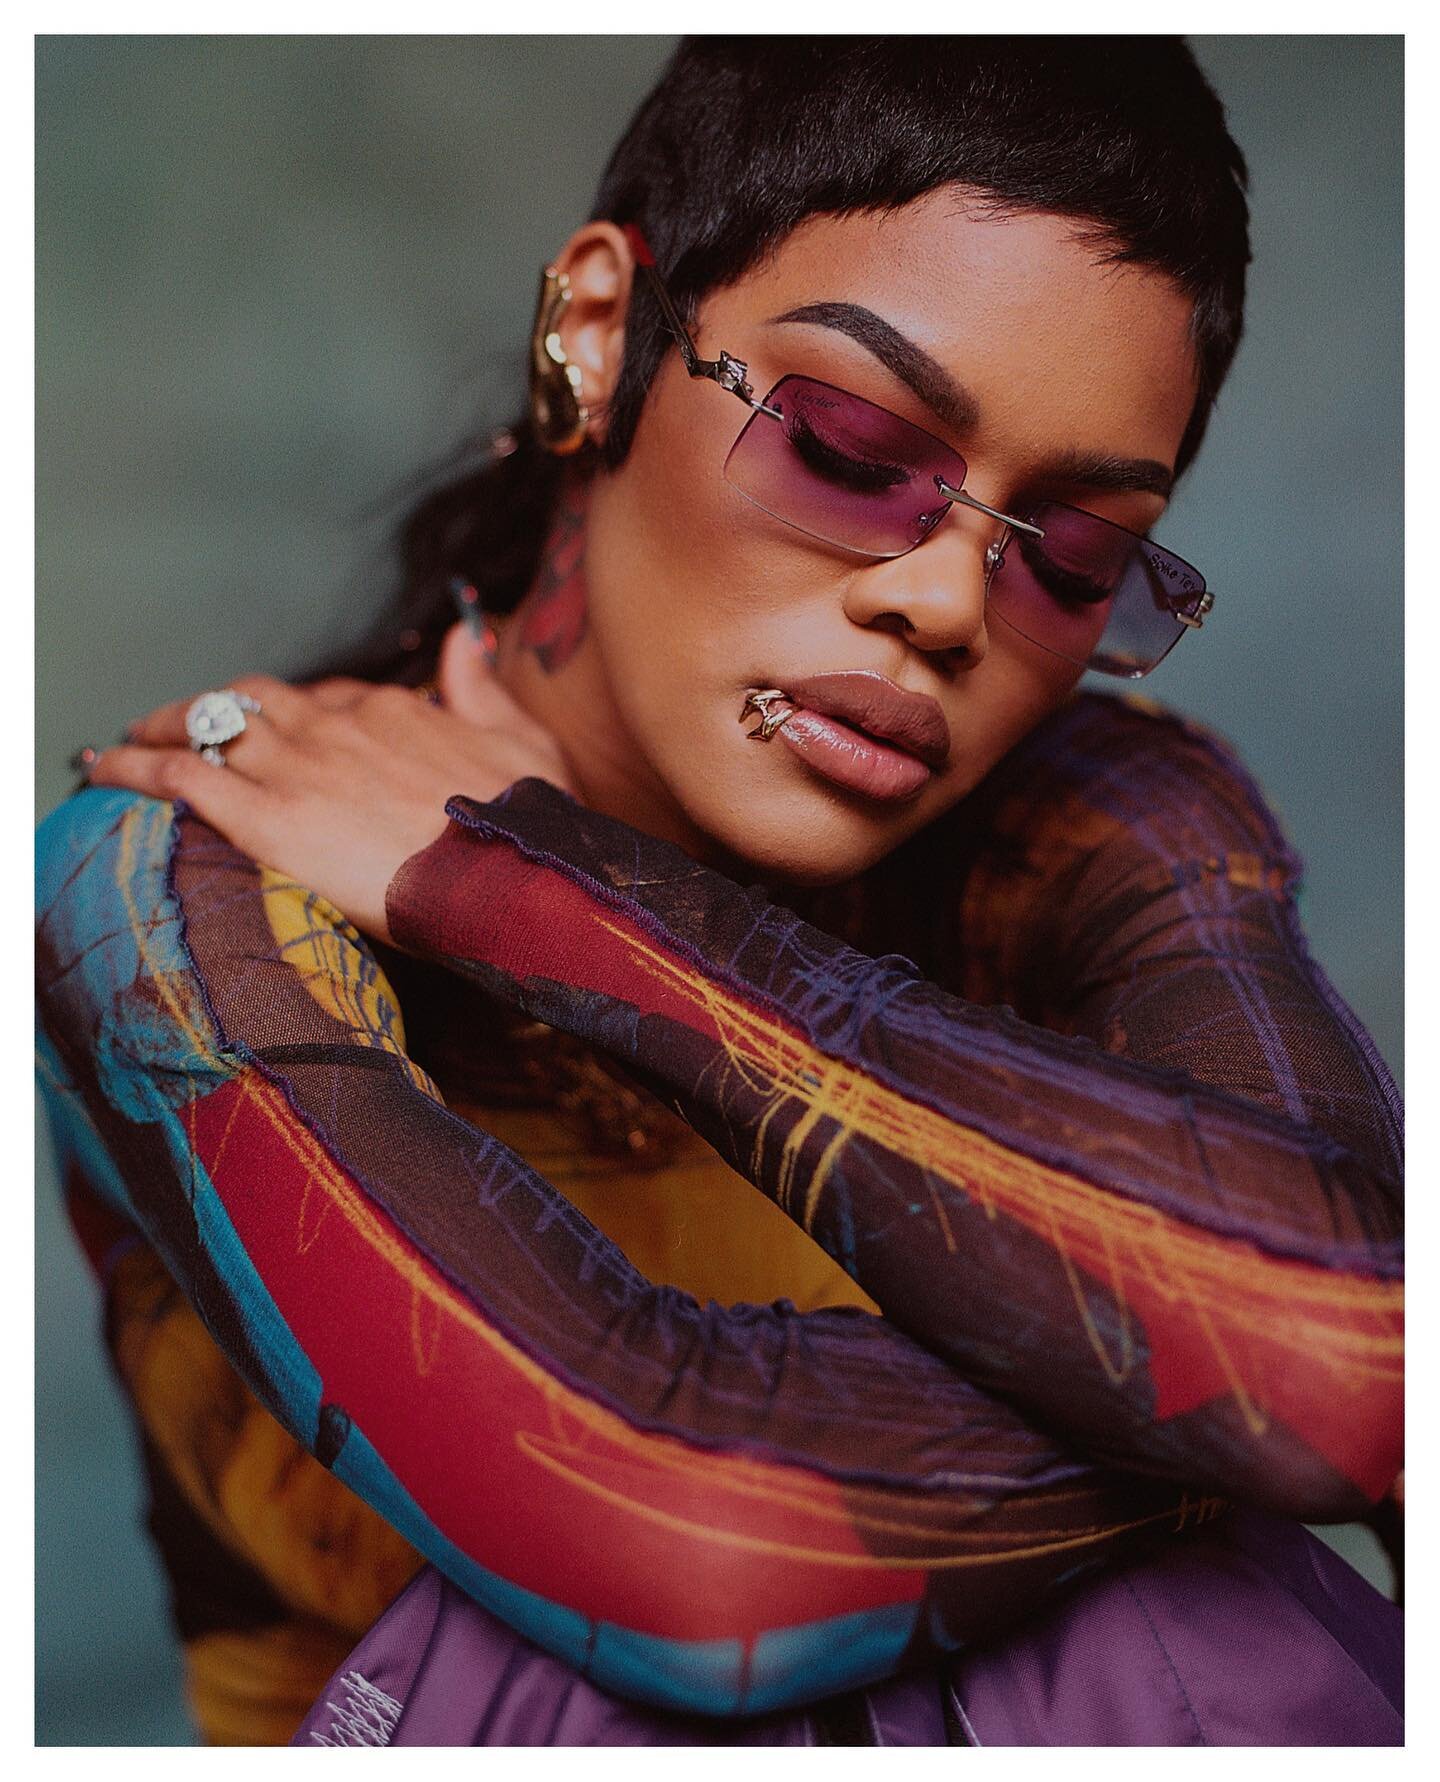 The @teyanataylor for @nytimes. 

Thank you for the assign @amandalwebster and @_amandayanez for the assist.